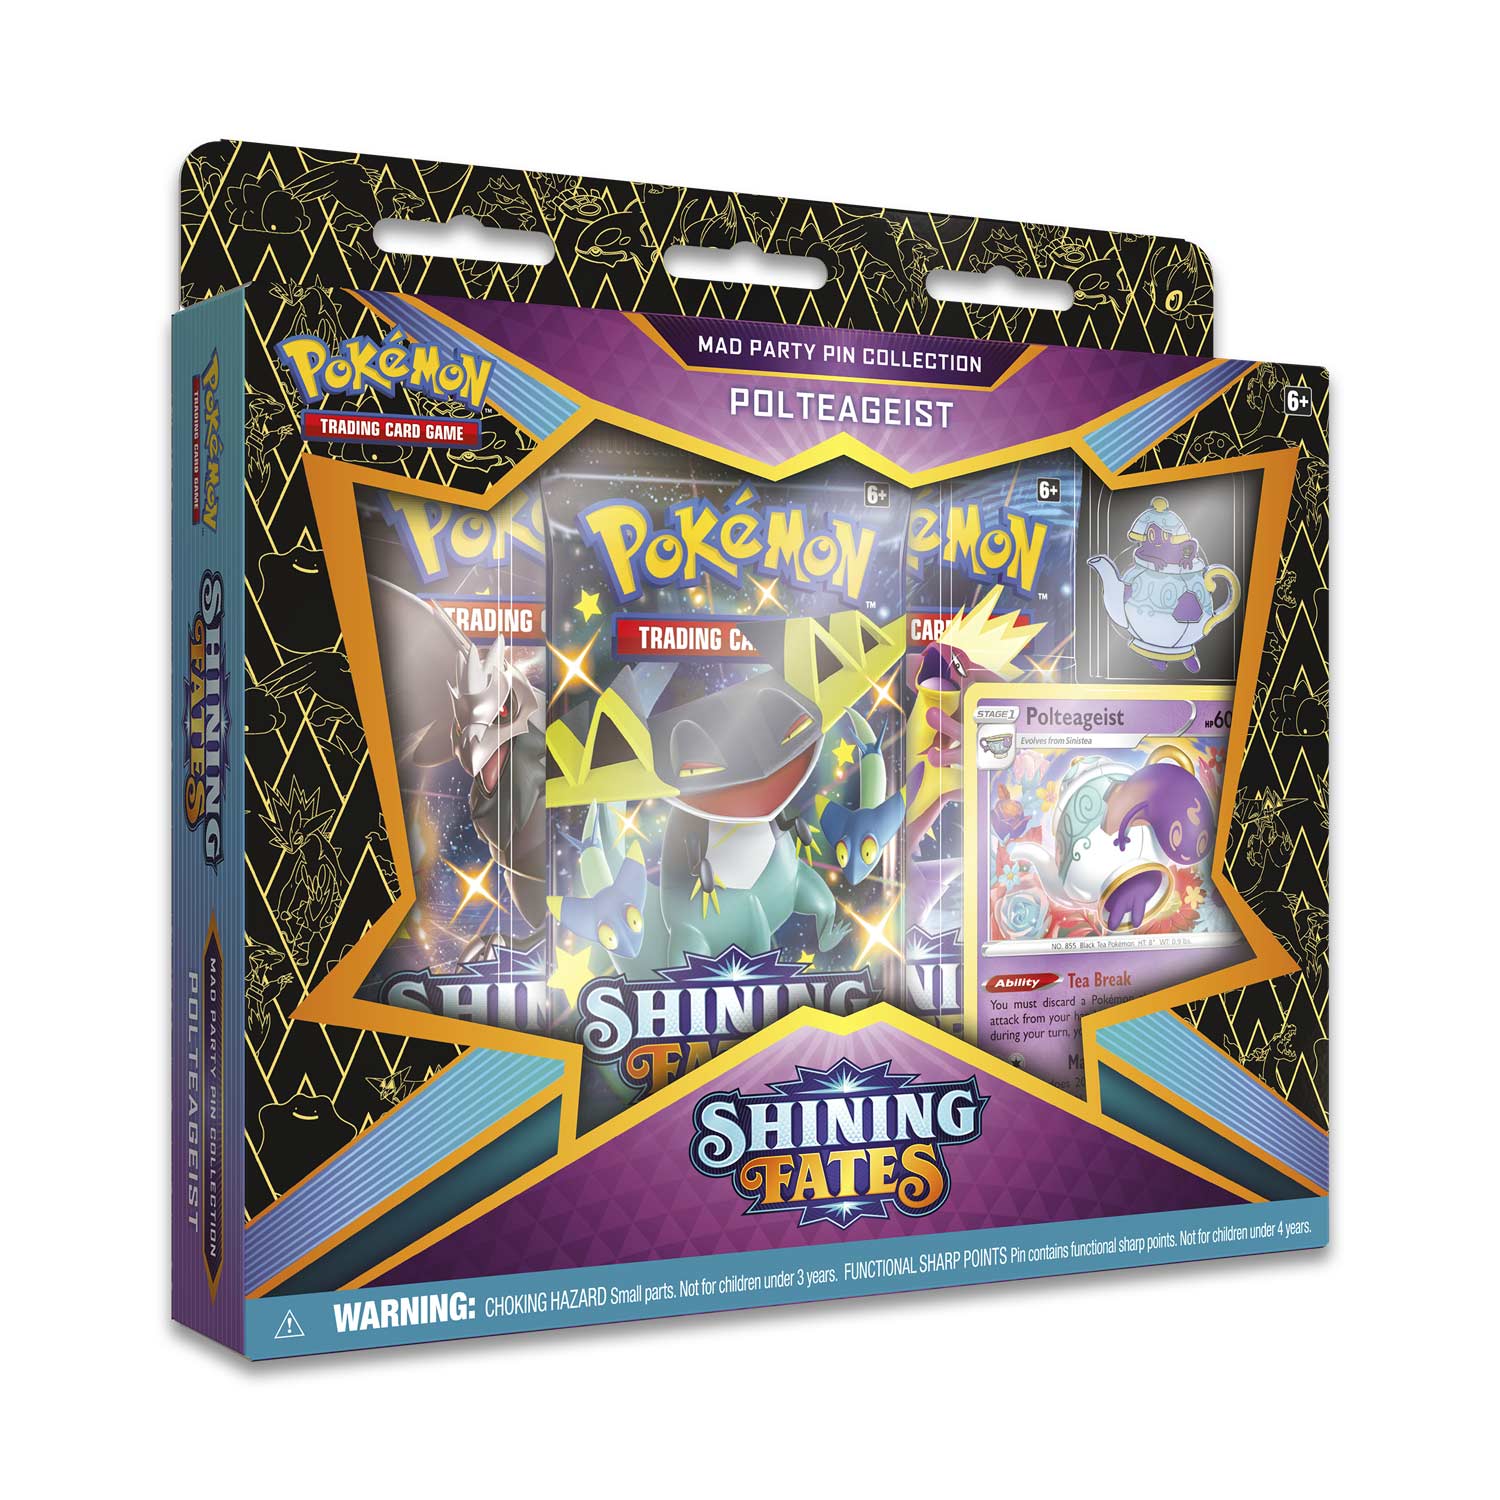 Pokémon TCG: Shining Fates Mad Party Pin Collection (Polteageist) Super Anime Store 